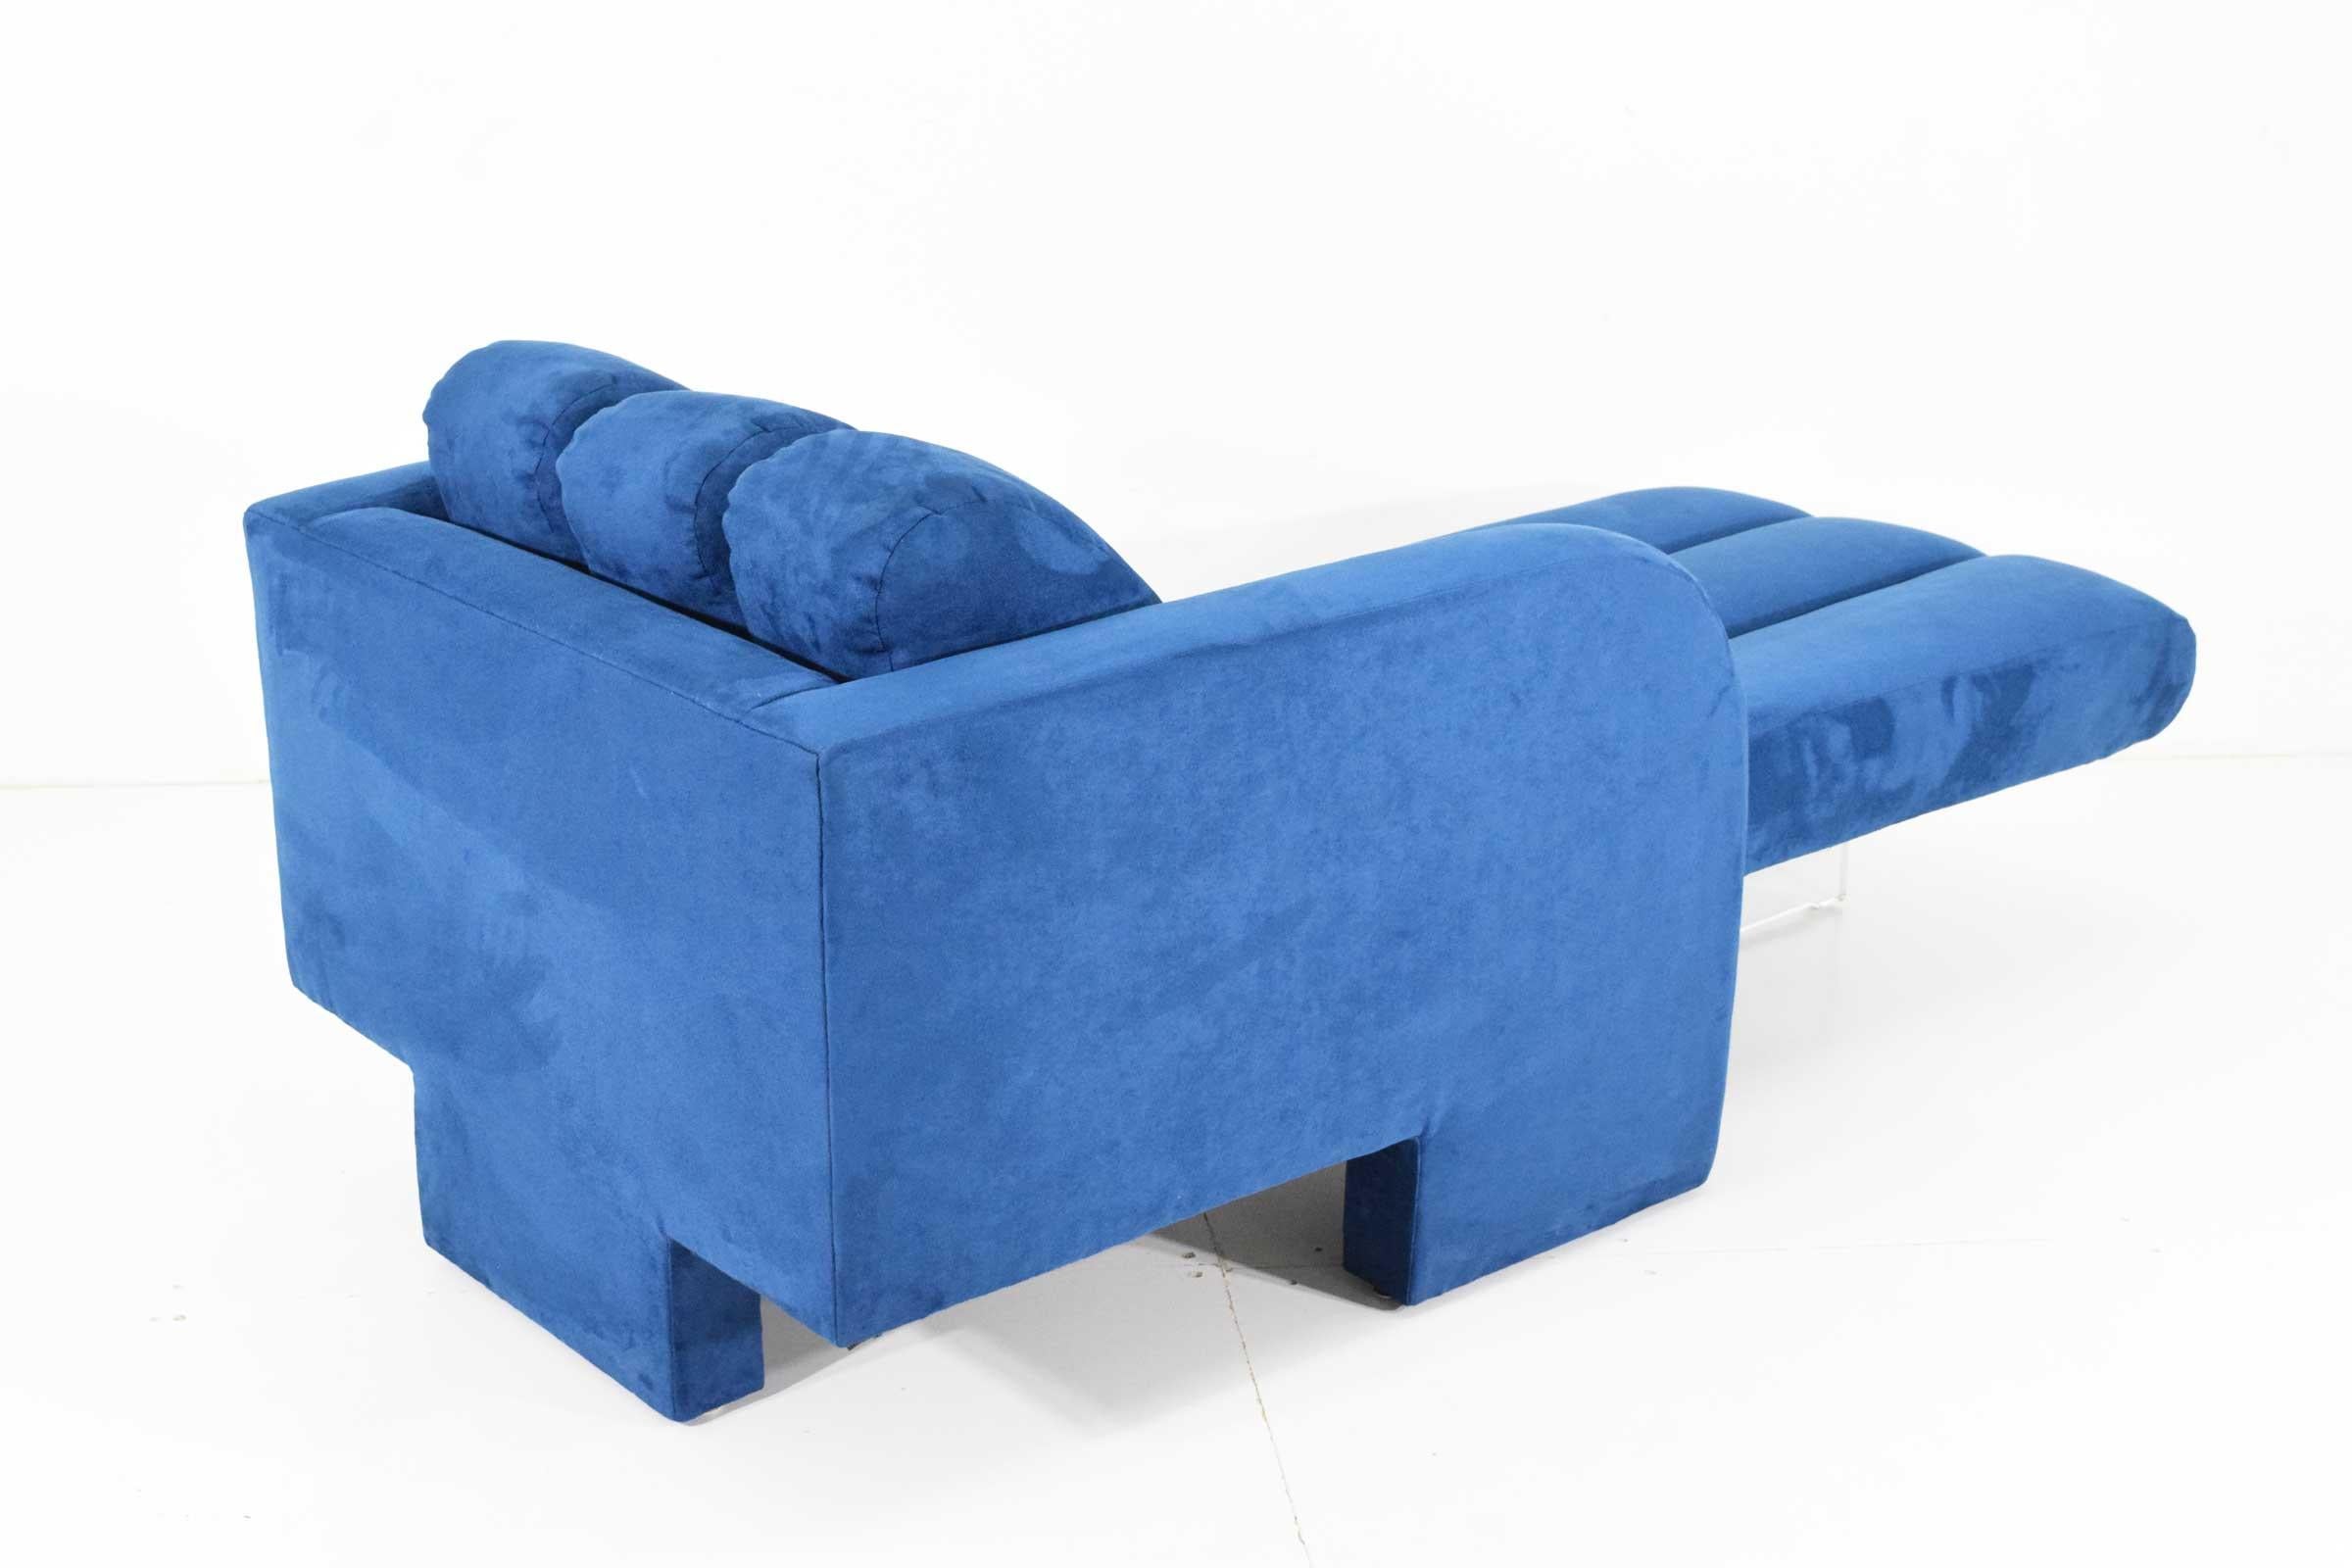 Beautiful chaise by Vladimir Kagan. New upholstery in a soft faux suede by Castel from Italy.